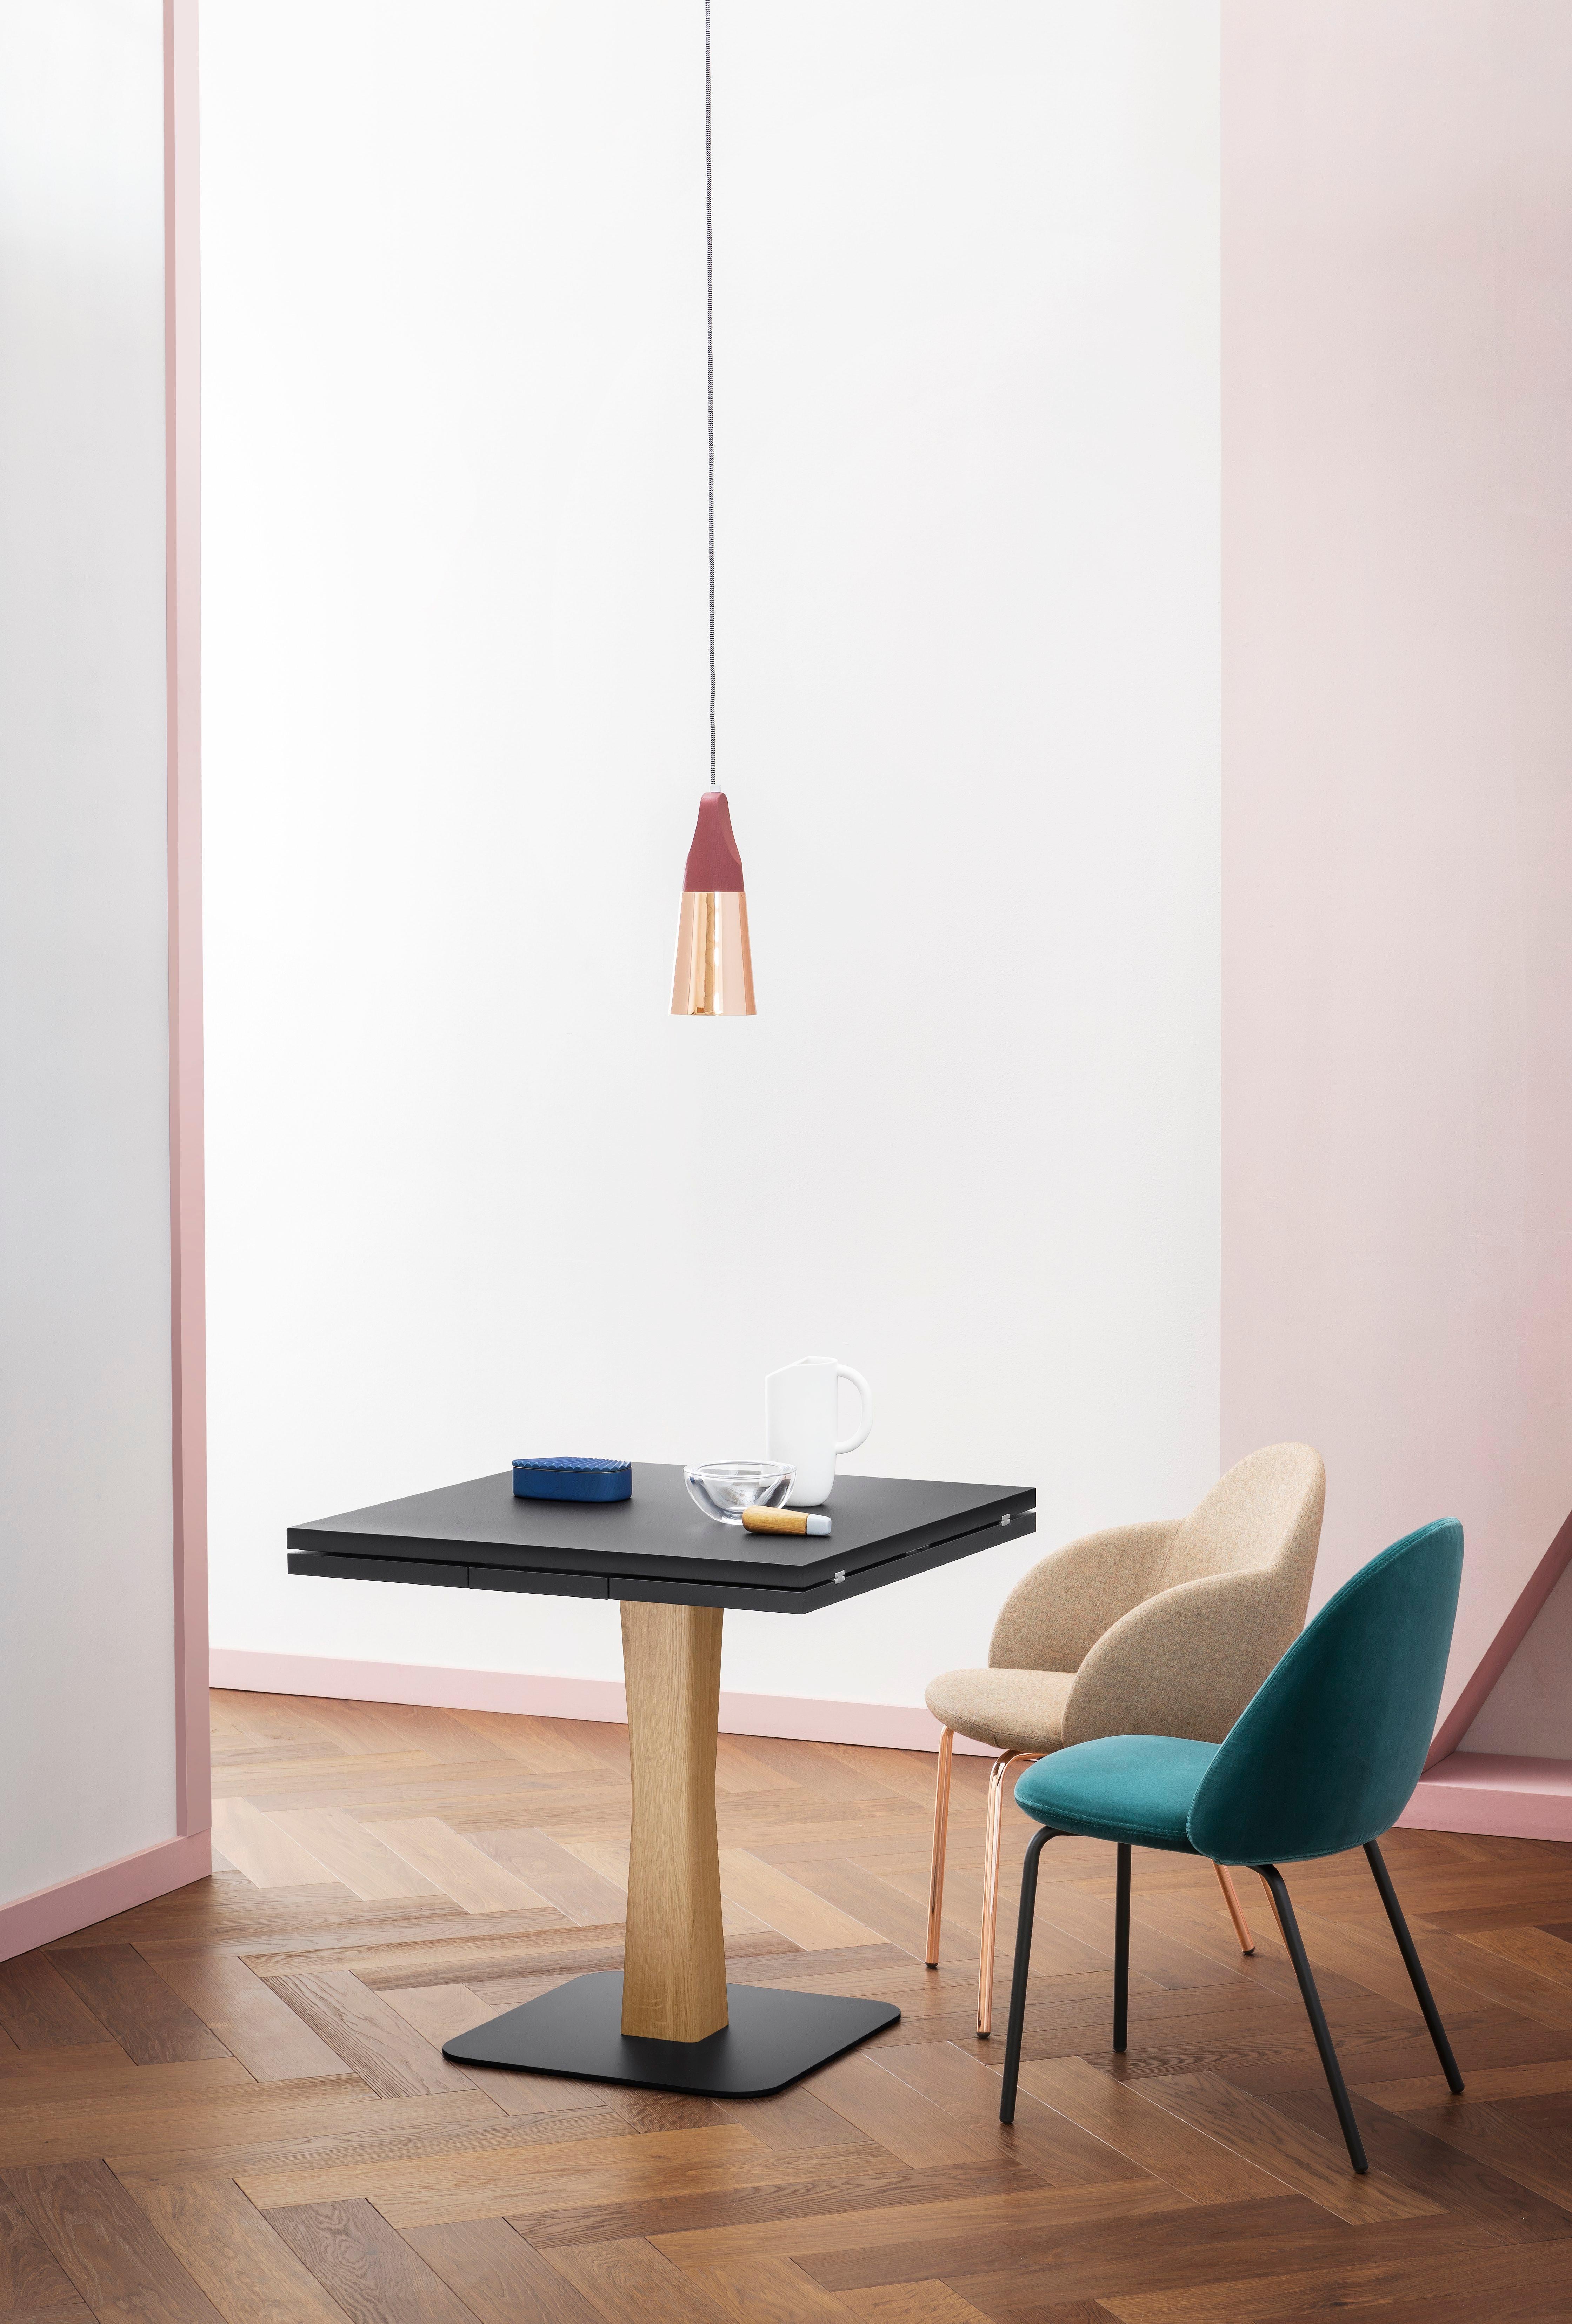 Gualtiero is designed for smaller, more intimate spaces, from bistros to small apartments, finding the spot for an iconic, practical table.

Extendible table with metal plate varnished black or white. The frame is in oak, canaletto walnut or